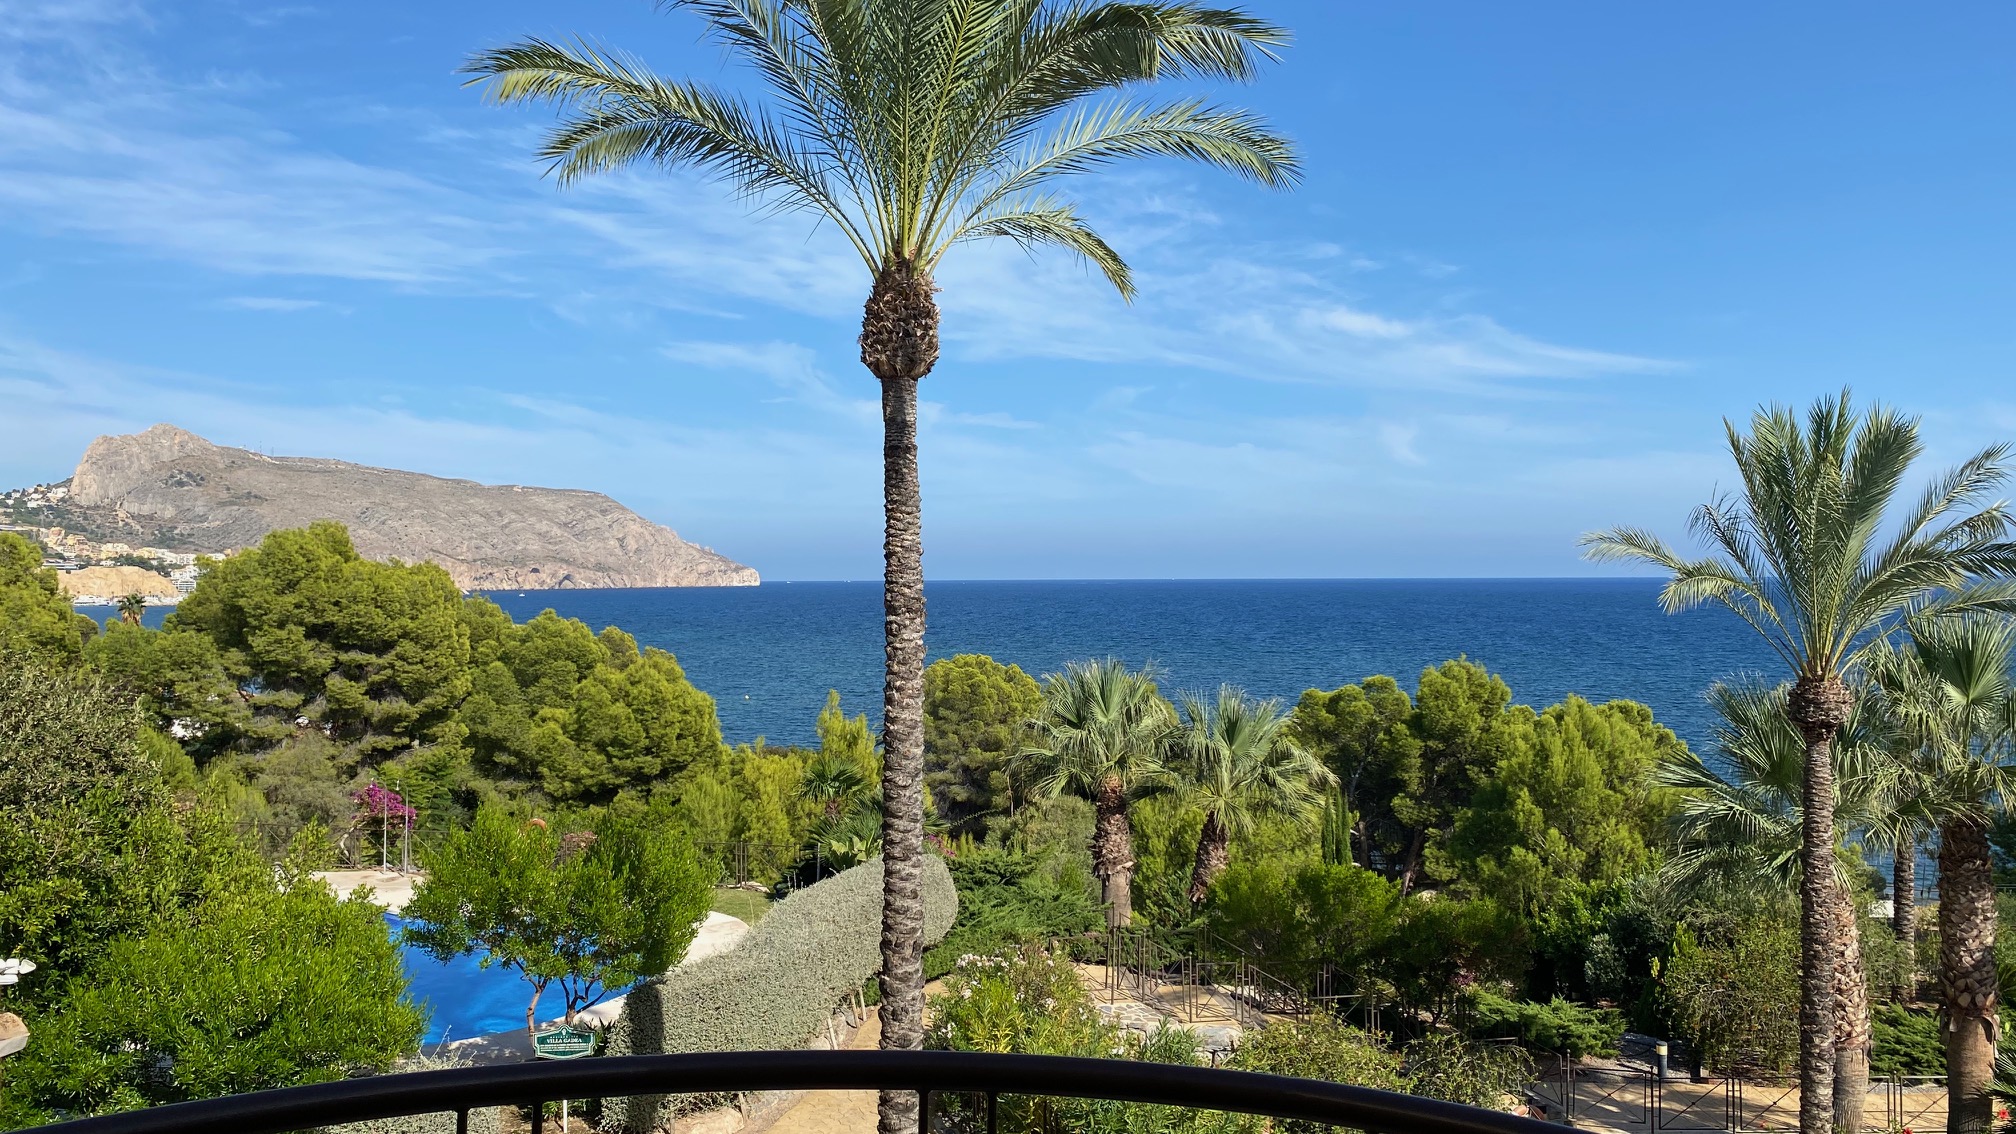 4 bedroom bungalow in luxury residential Villa Gadea next to the sea. First line and unbeatable views of the sea from the large terrace